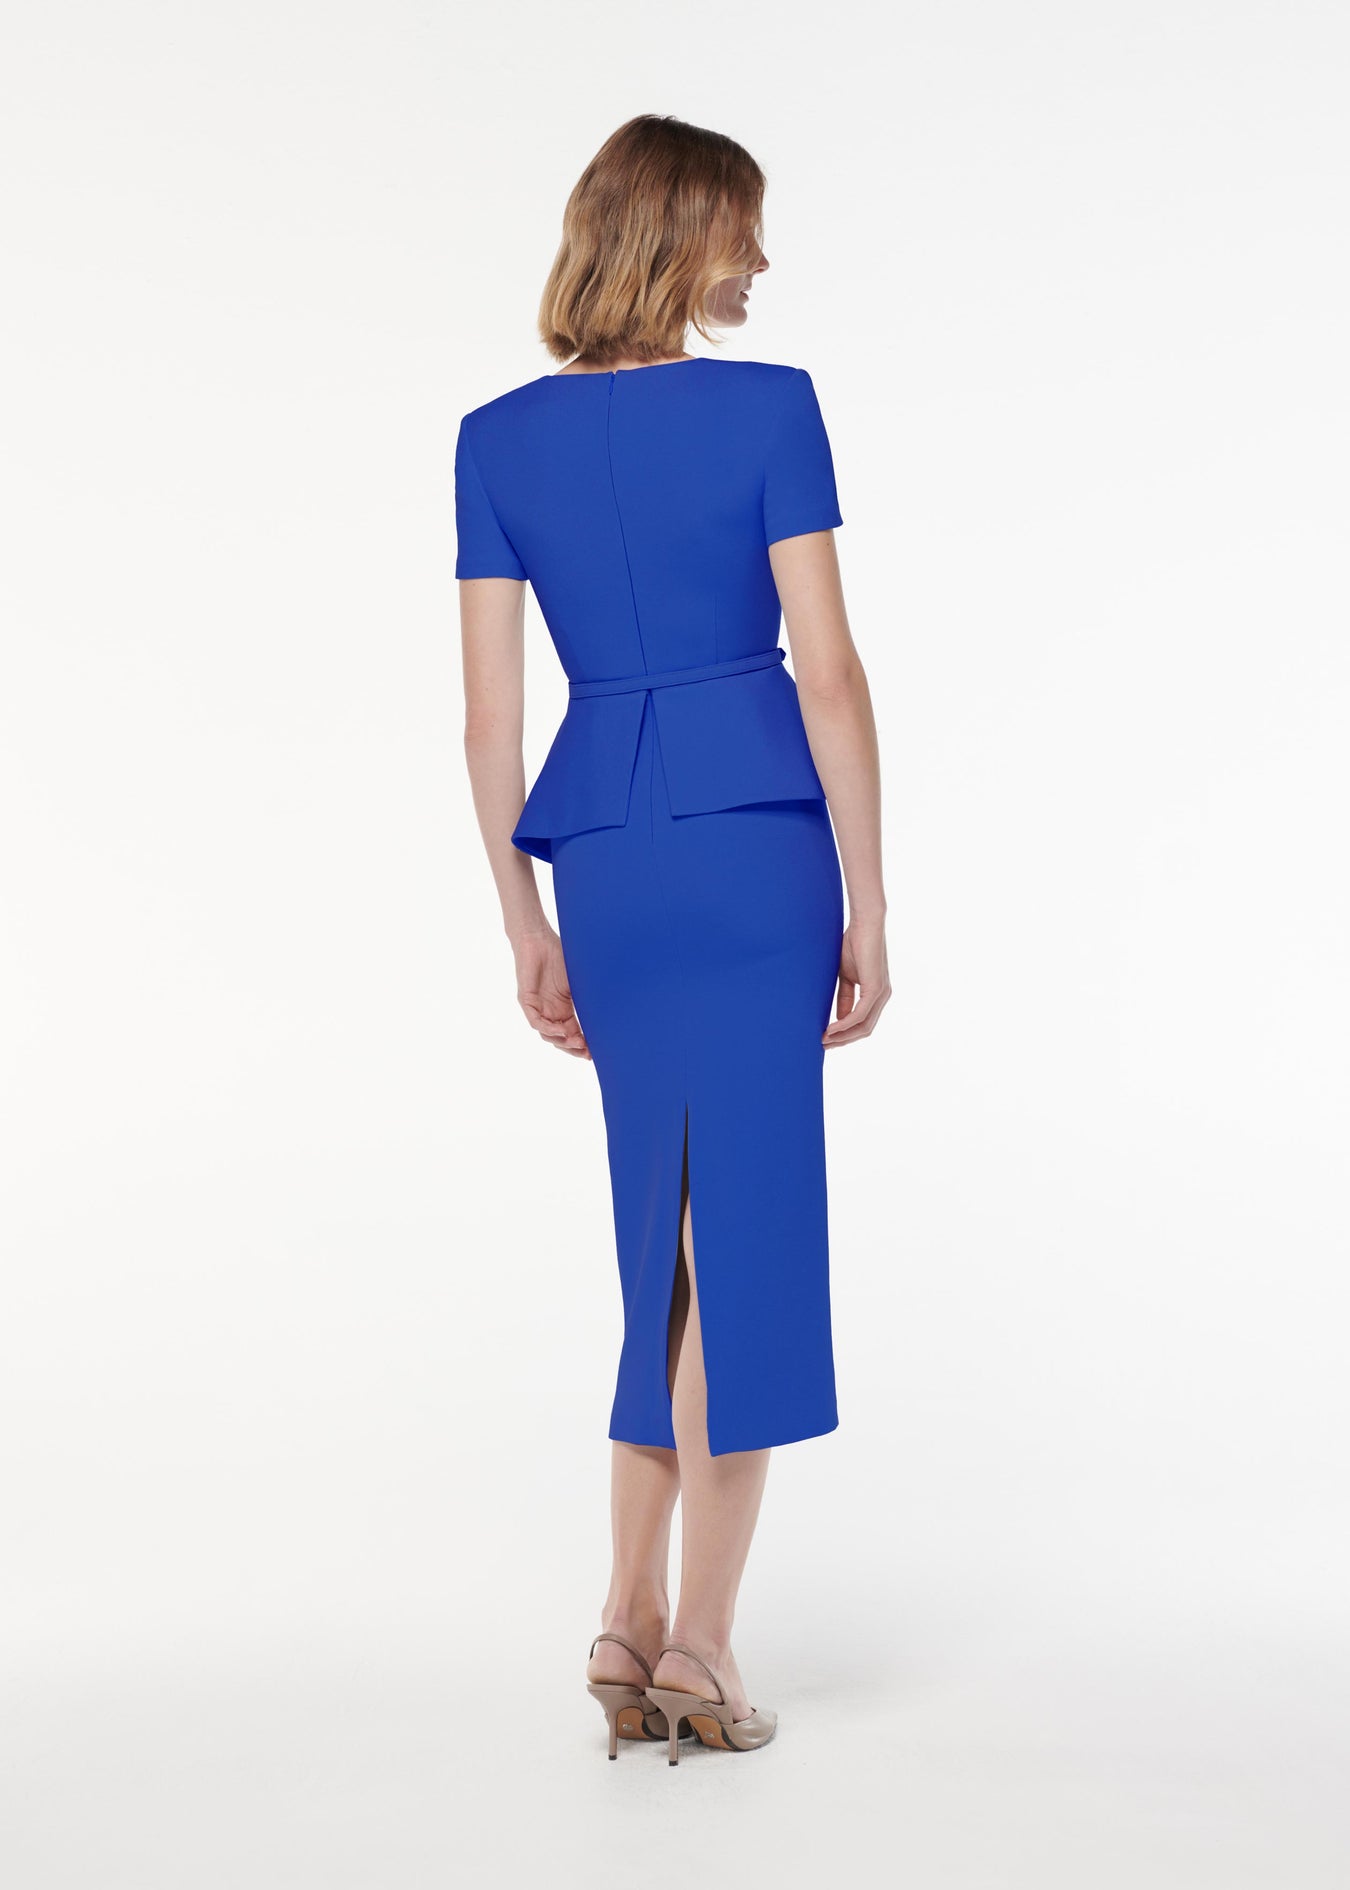 A photograph of a woman wearing a Short Sleeve Stretch Wool Silk Midi Dress in Blue